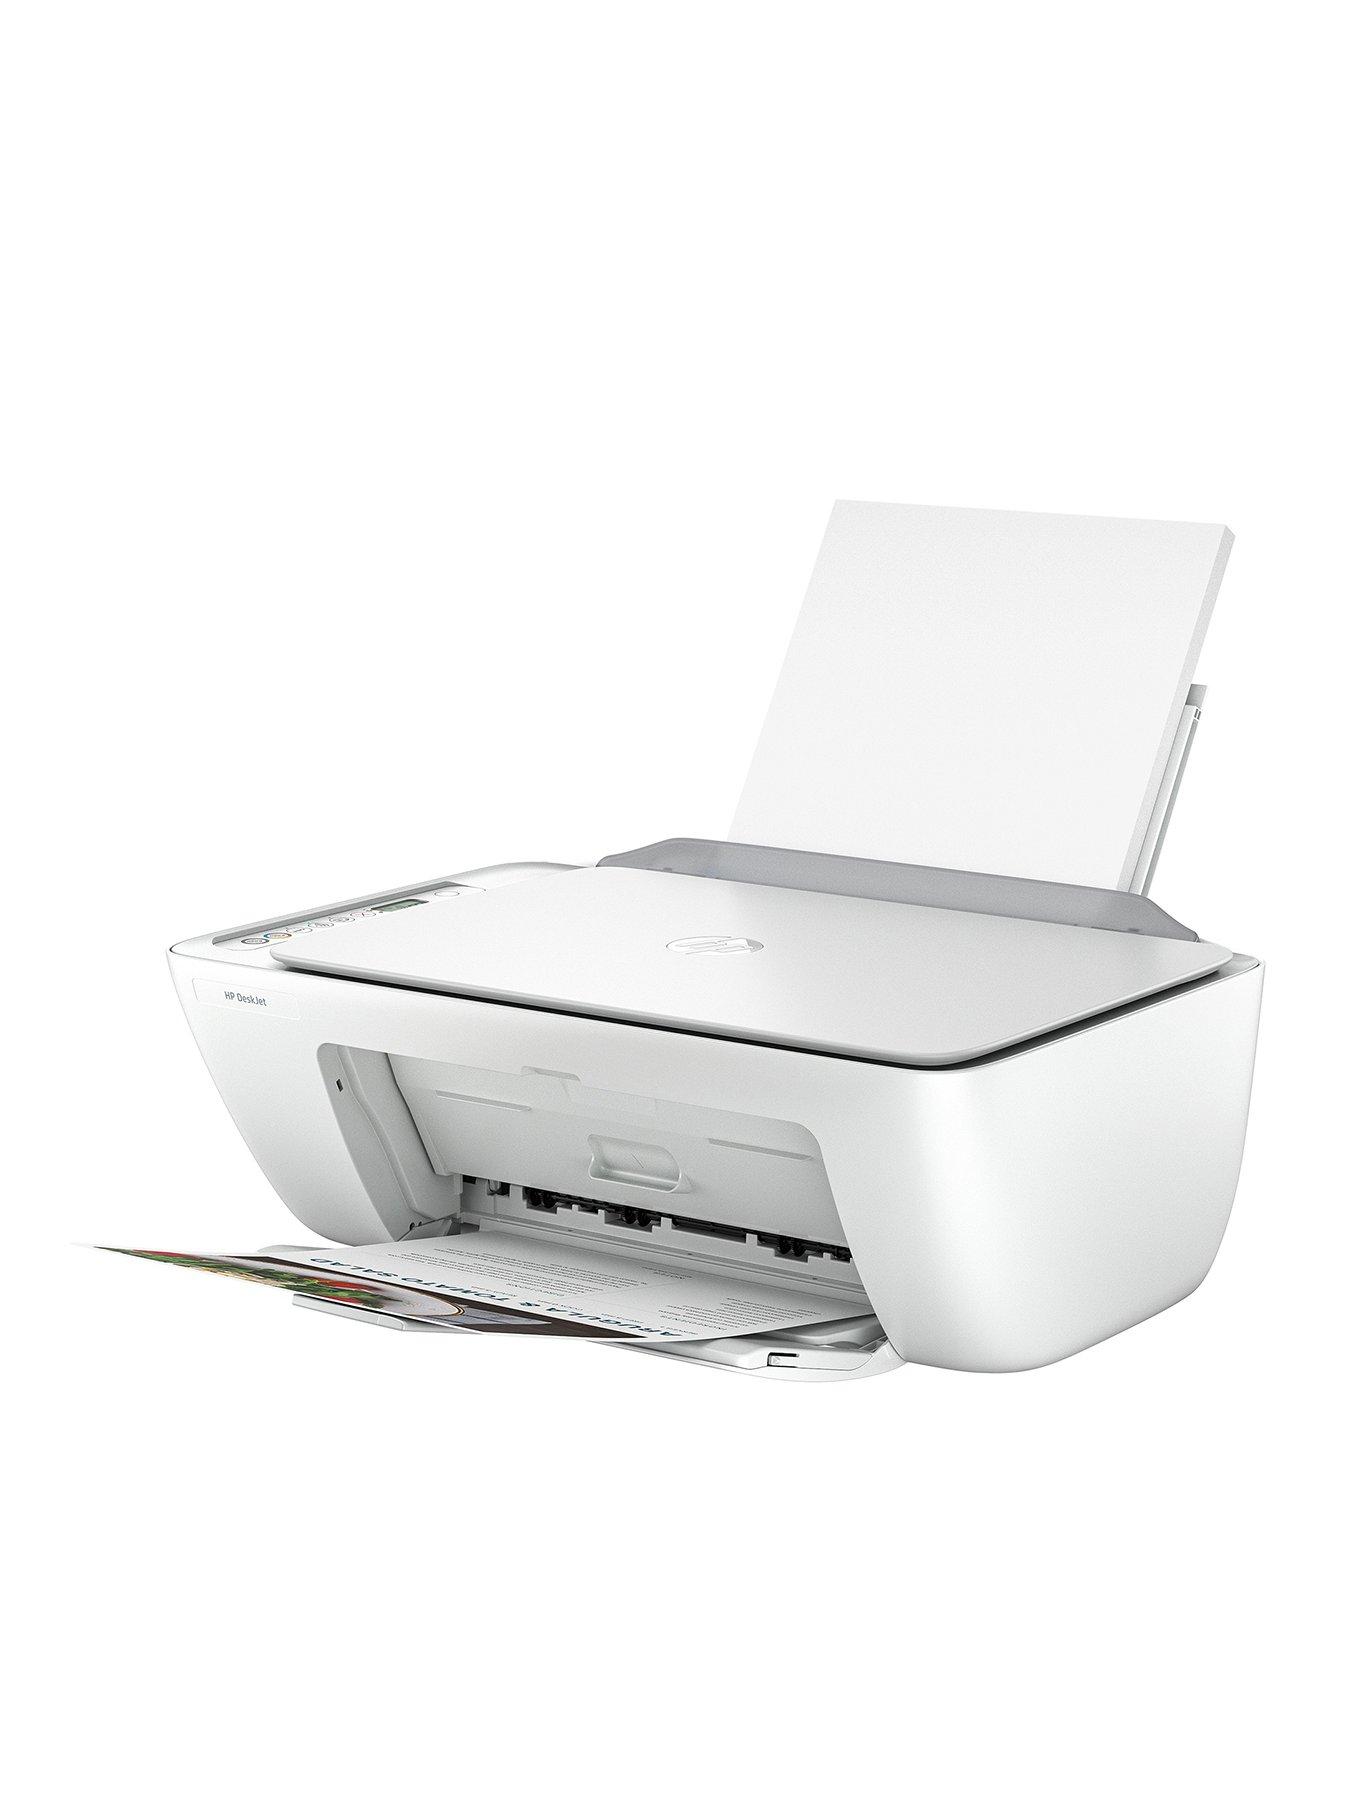 HP Deskjet 2720e All-in-One Wireless Printer, HP+ Enabled & HP Instant Ink  Compatible, White & Grey